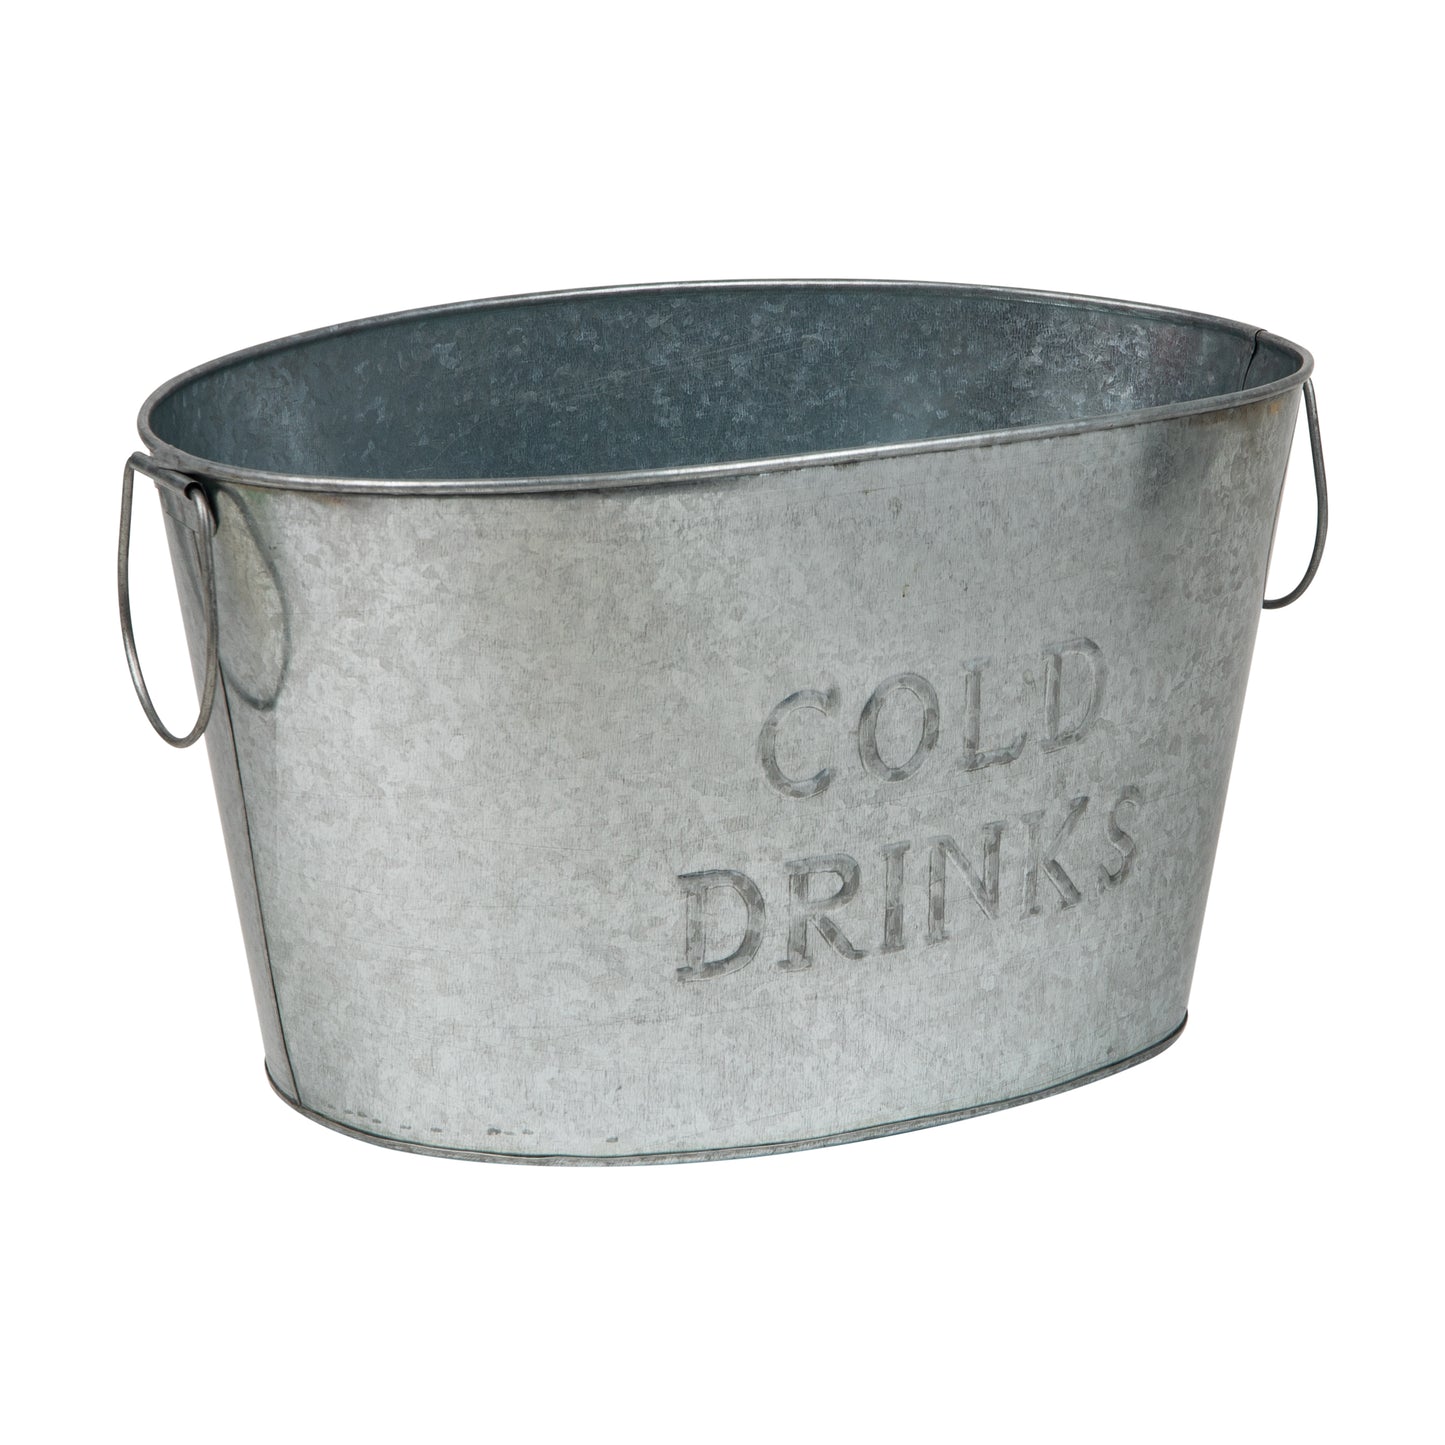 Mind Reader Cold Beverage Bucket with Handles, Party Basket, Entertaining, Portable, Small, Galvanized Metal, 17.25"L x 11"W x 9.5"H, Silver